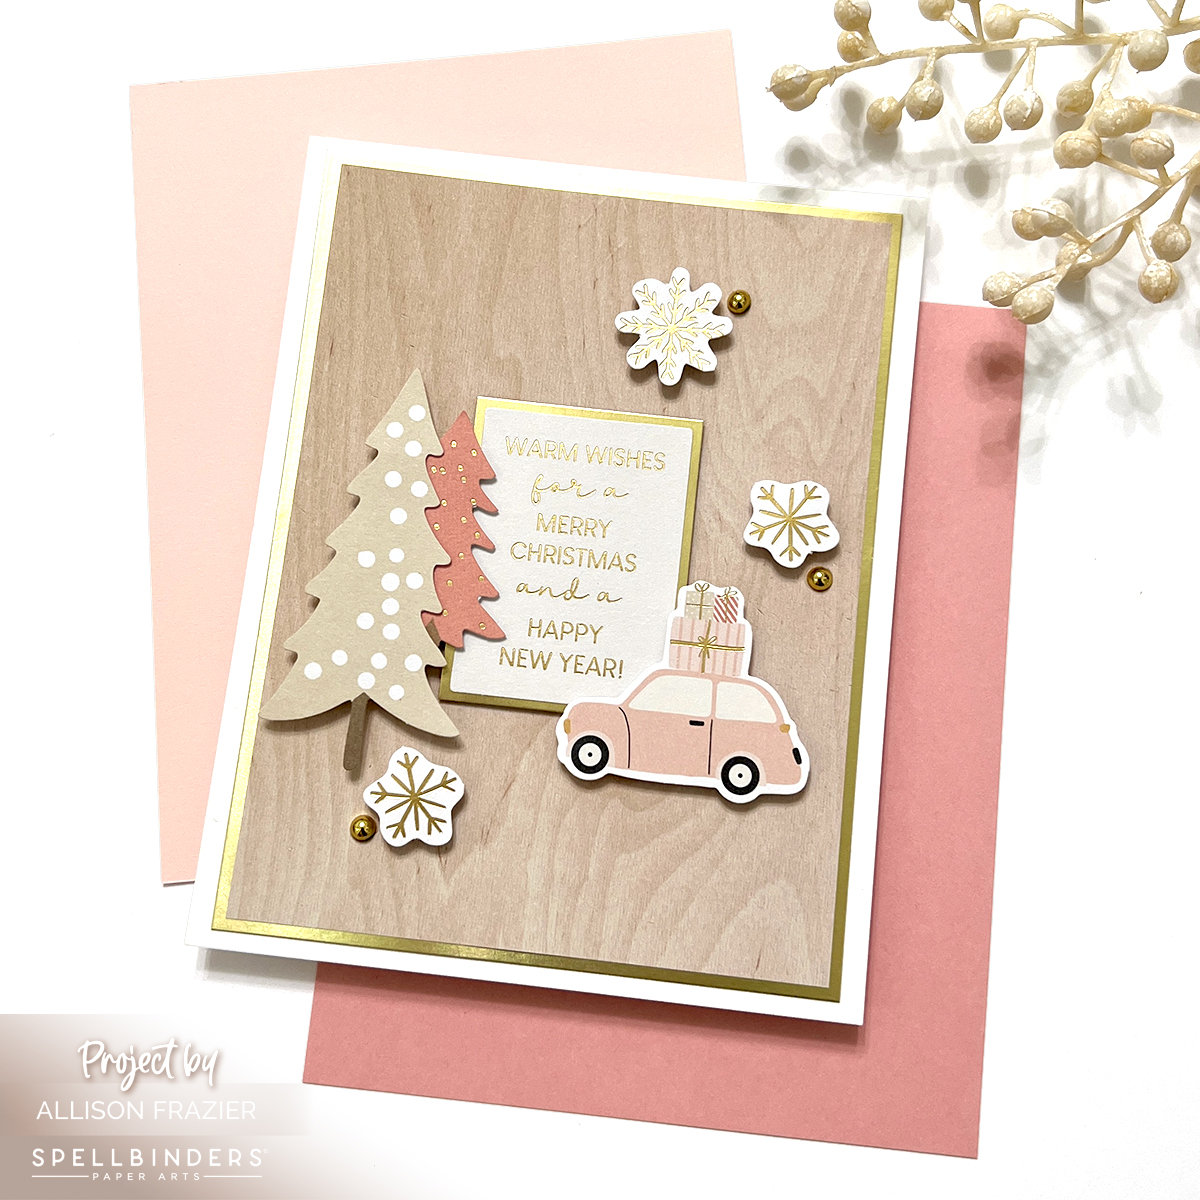 Make It Merry Limited Edition Holiday Cardmaking Kit 2023 Inspiration! -  Spellbinders Blog